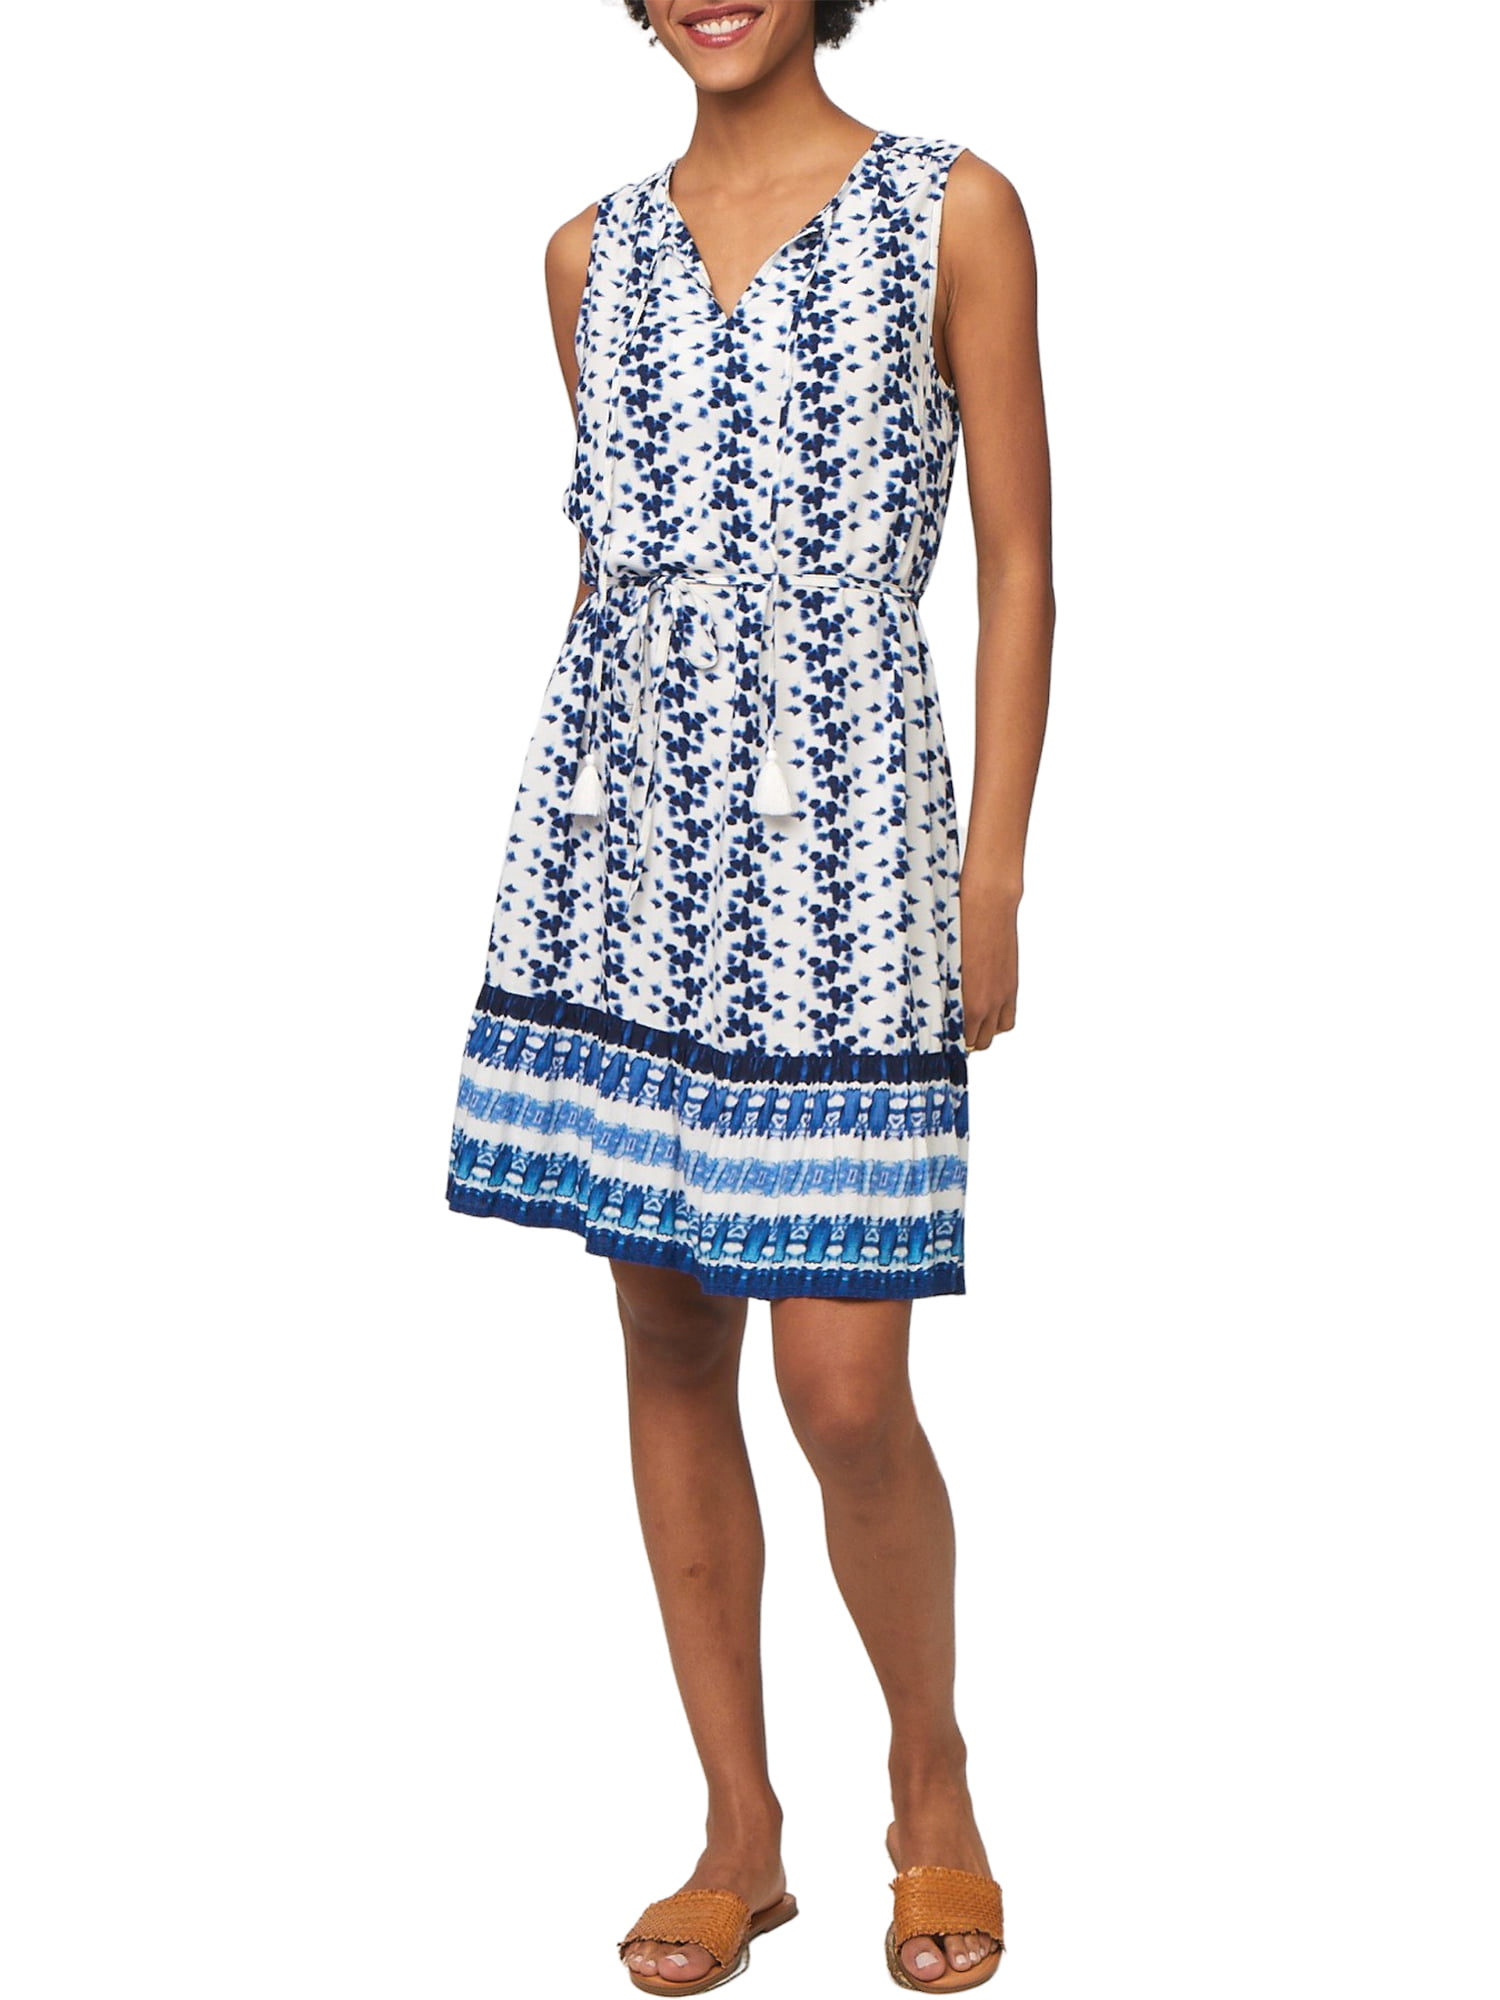 Buy > beach lounge lunch dresses > in stock